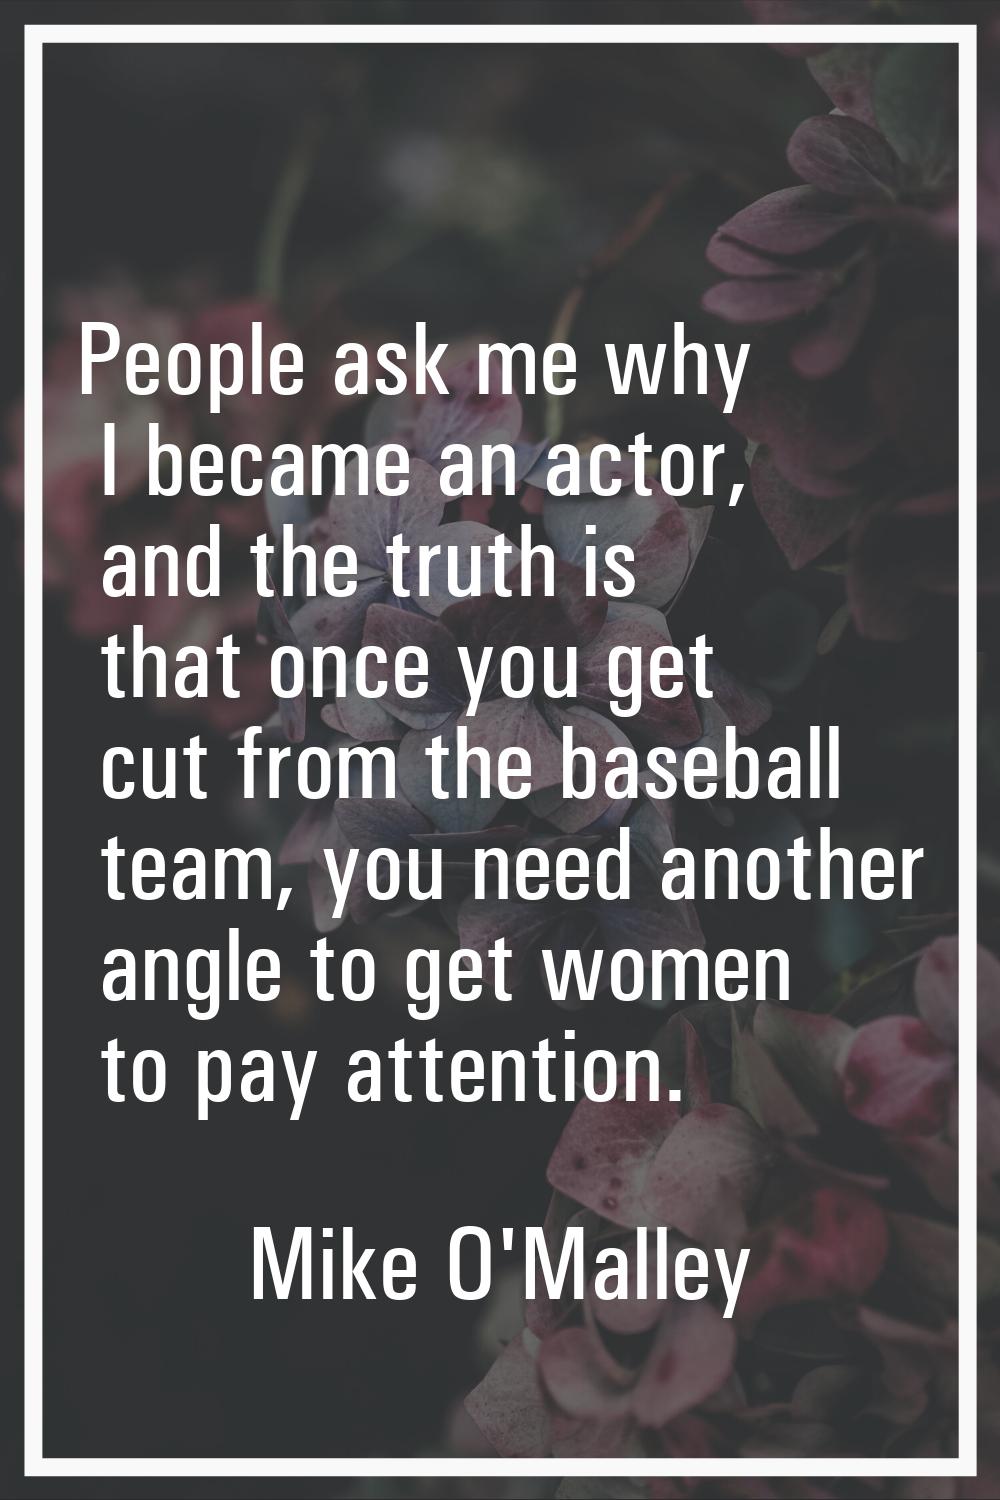 People ask me why I became an actor, and the truth is that once you get cut from the baseball team,